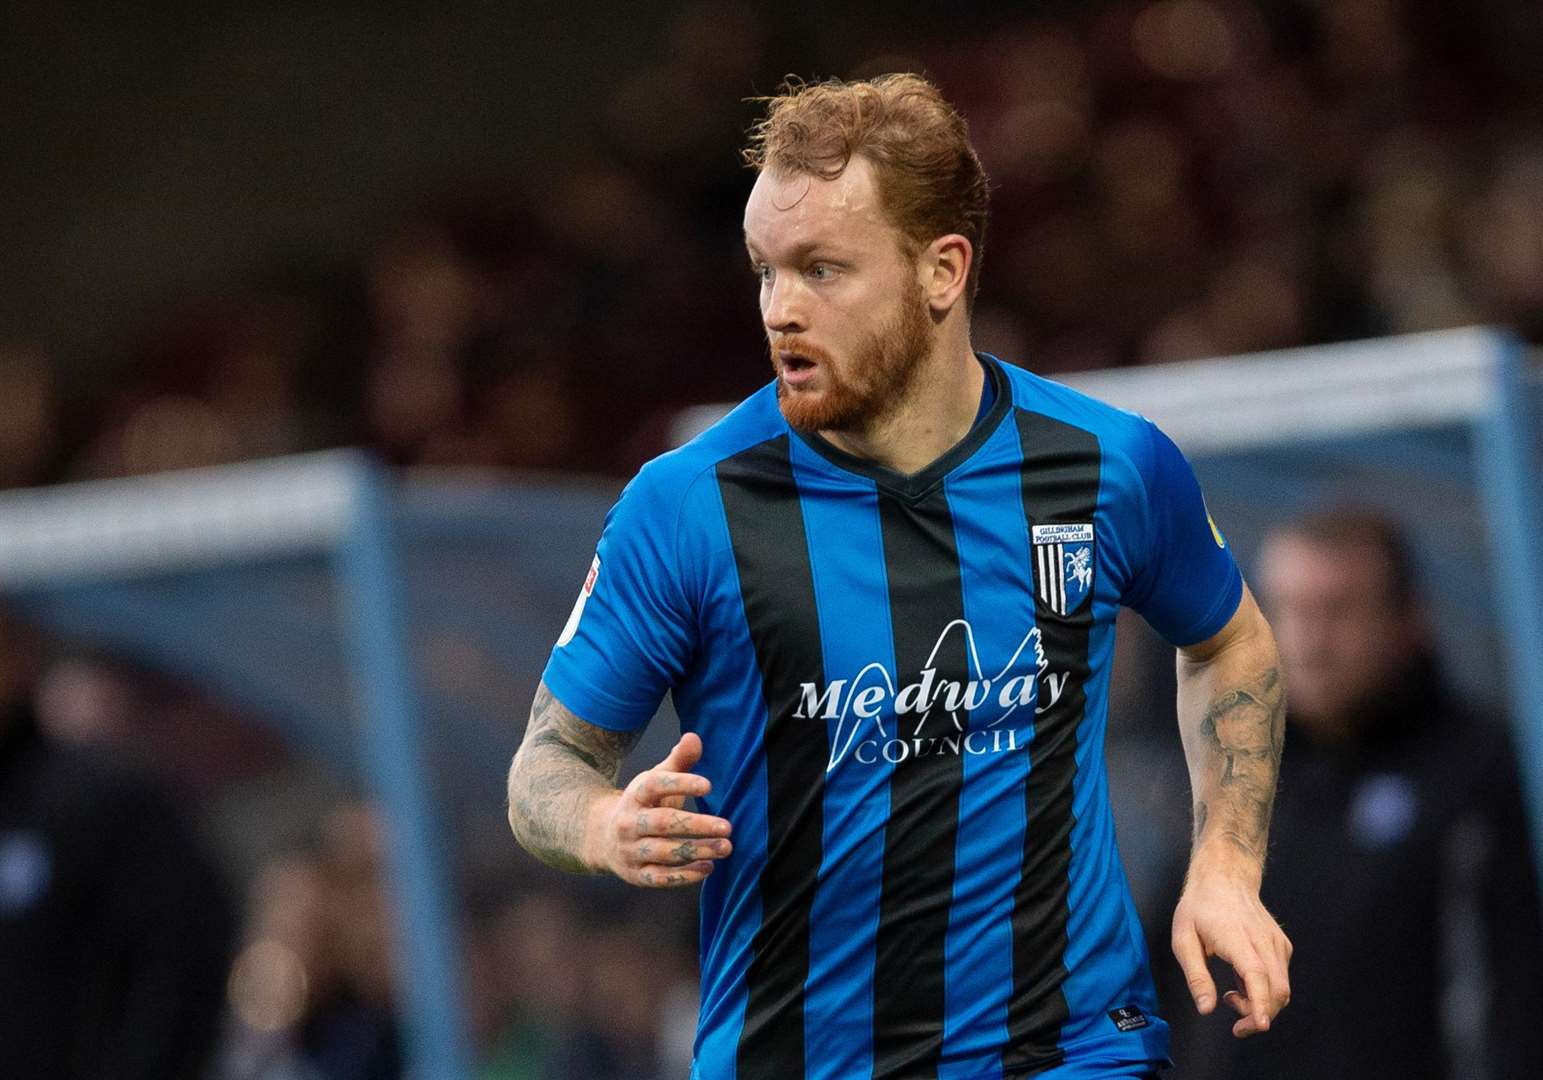 Gillingham need to agree a new deal with Tottenham for Connor Ogilvie before the weekend